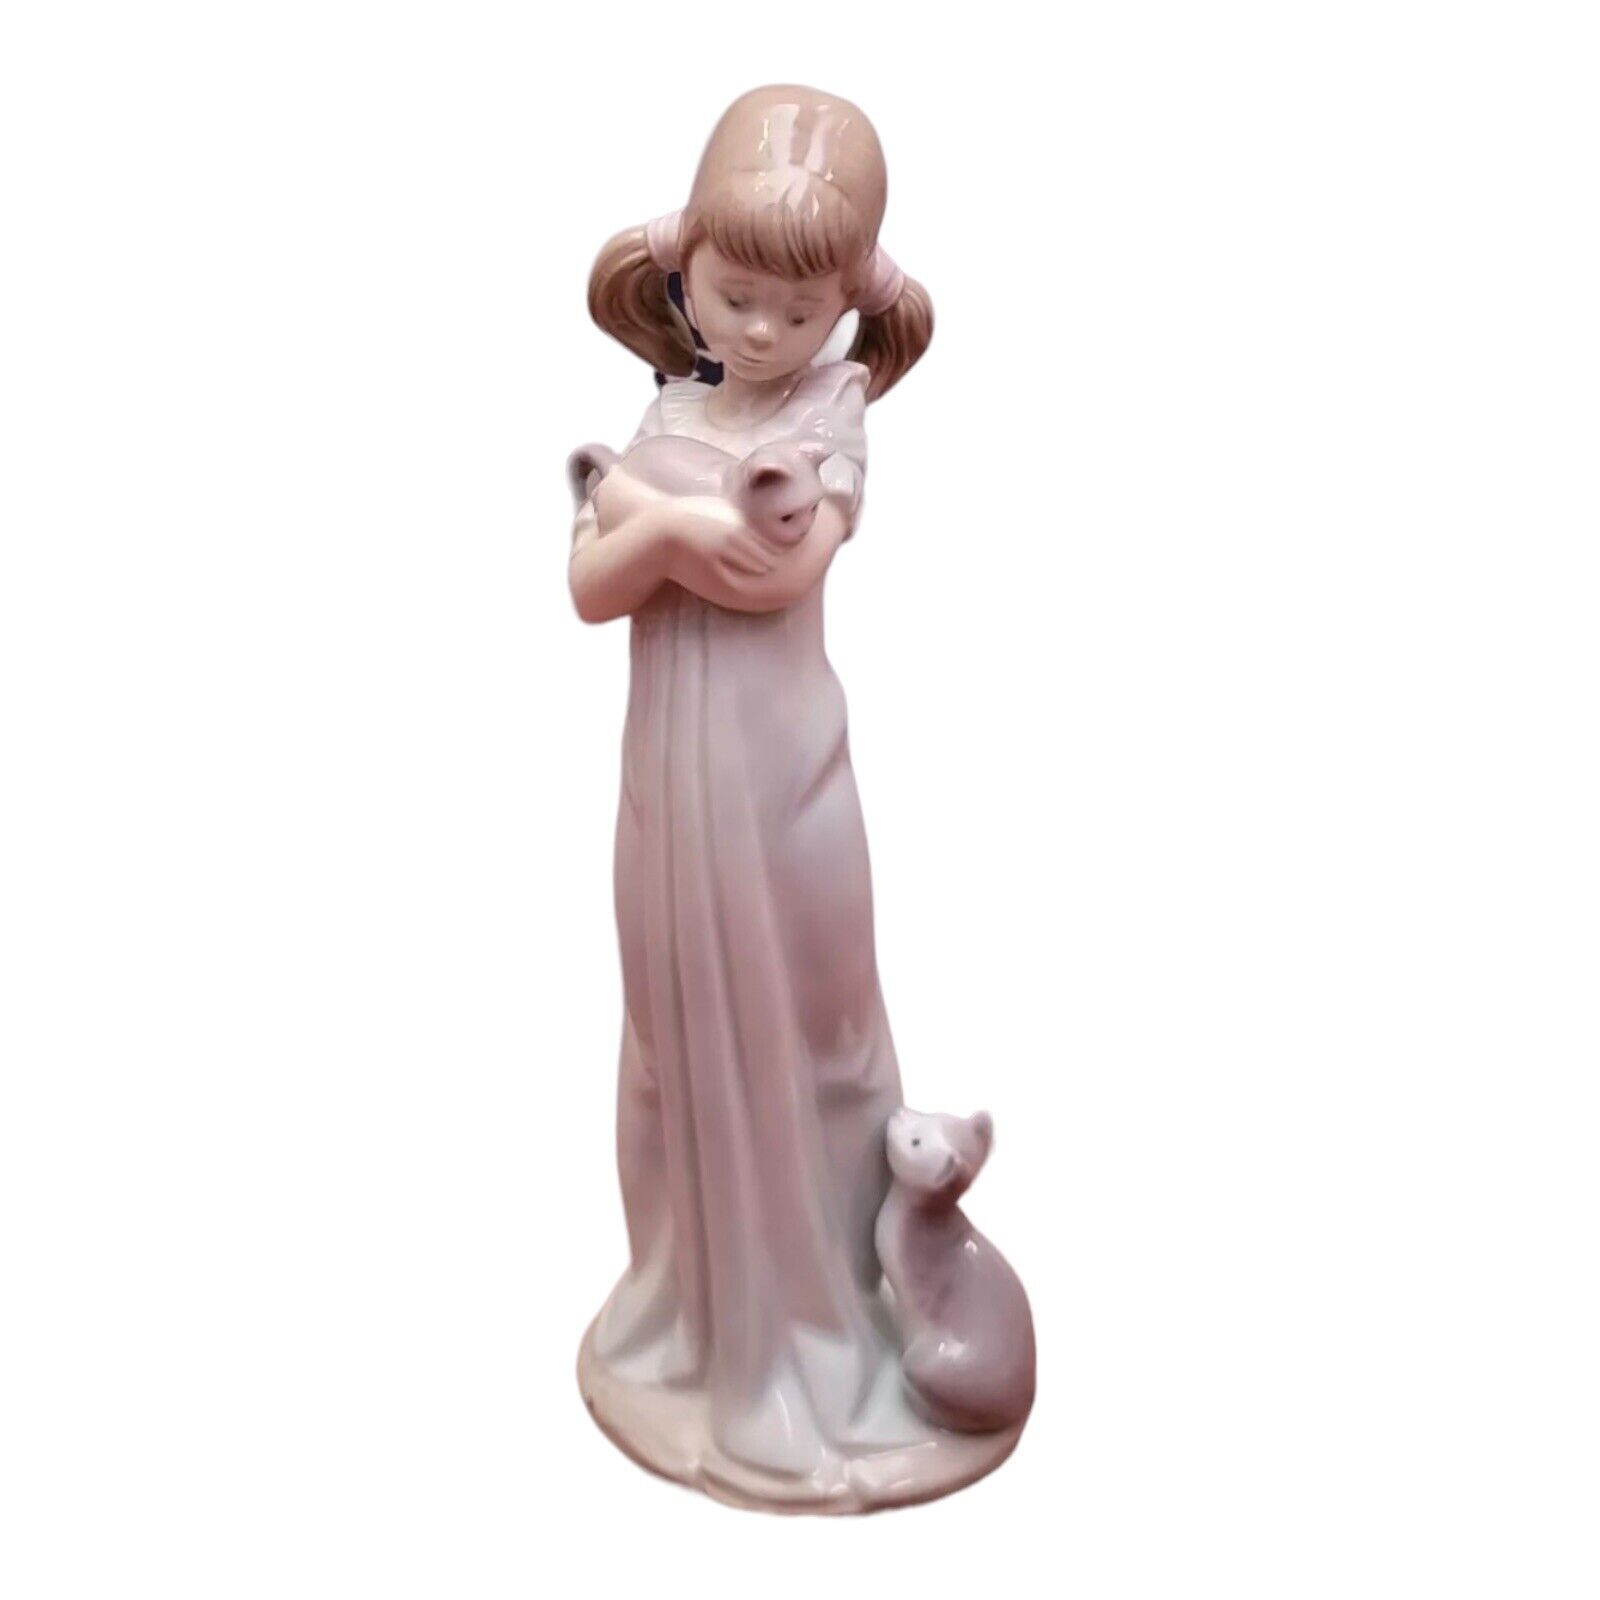 Lladro Don't Forget Me retired vtg Figurine 5743 Young Girl w Kittens w ORIG BOX